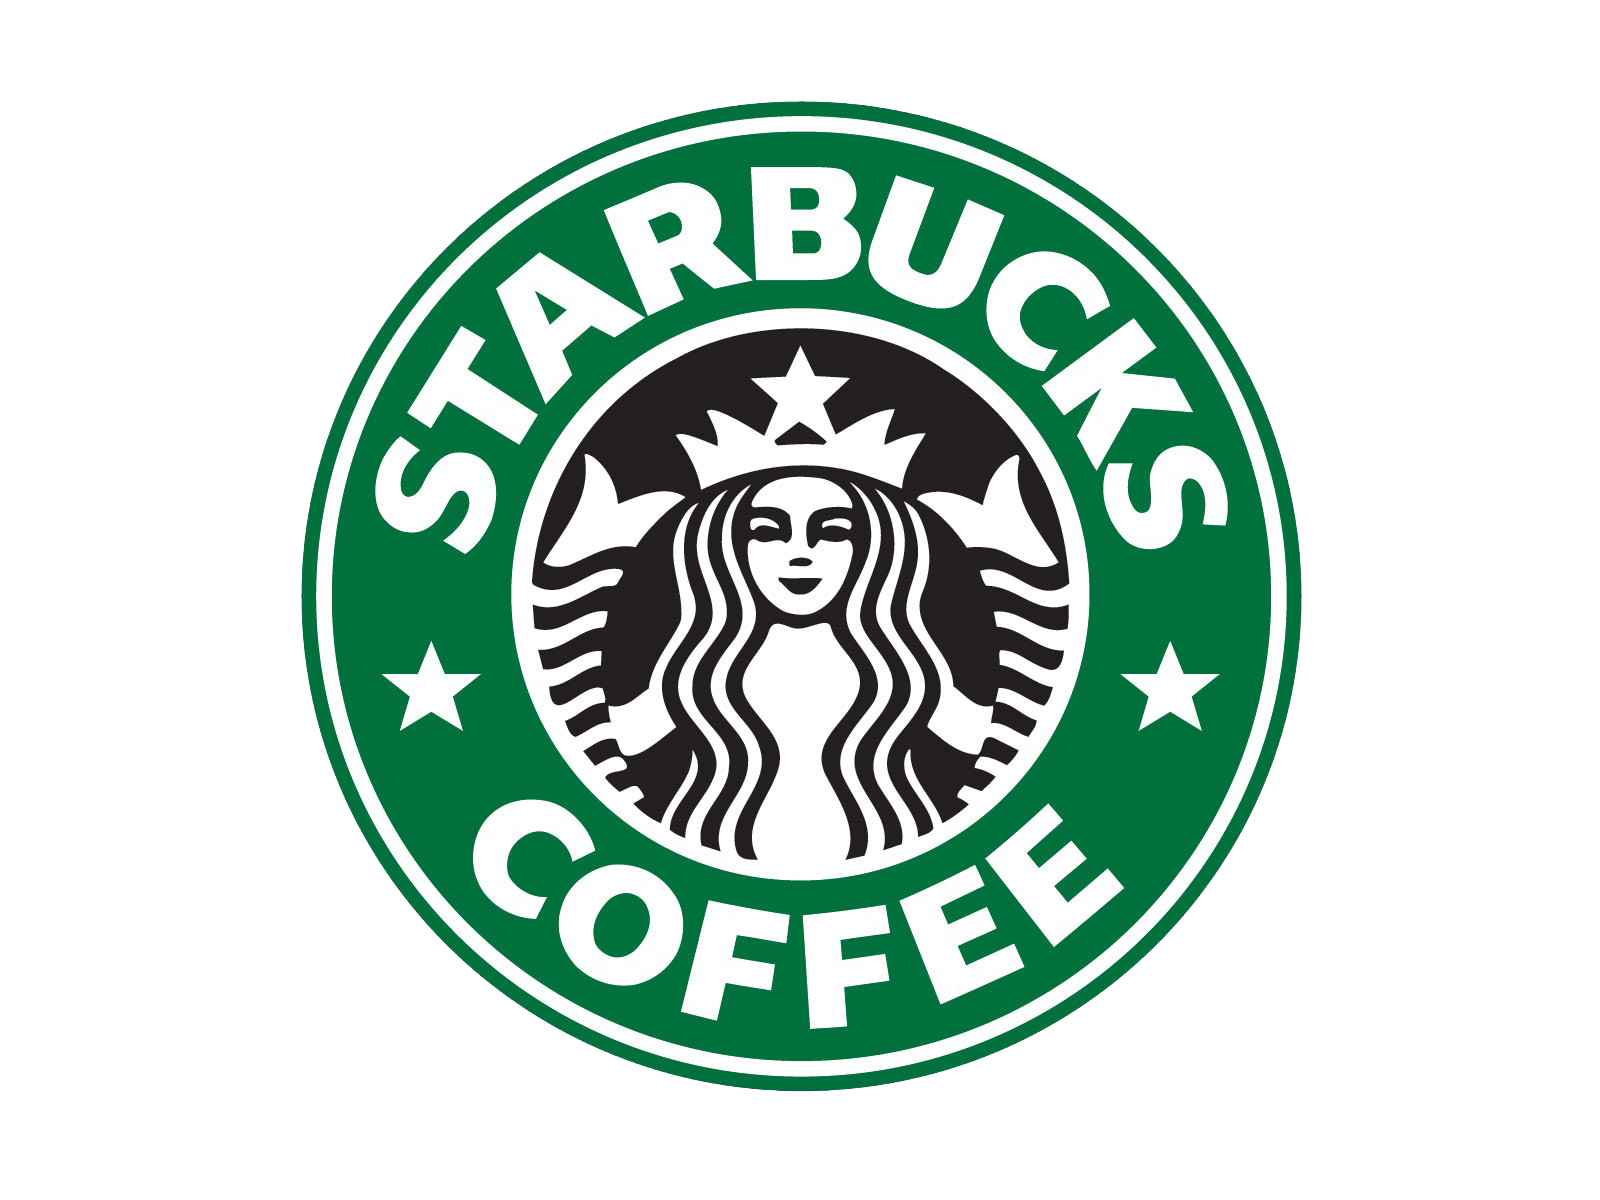 Coffee Frappuccino Starbucks Logo Cafe Campus PNG Image